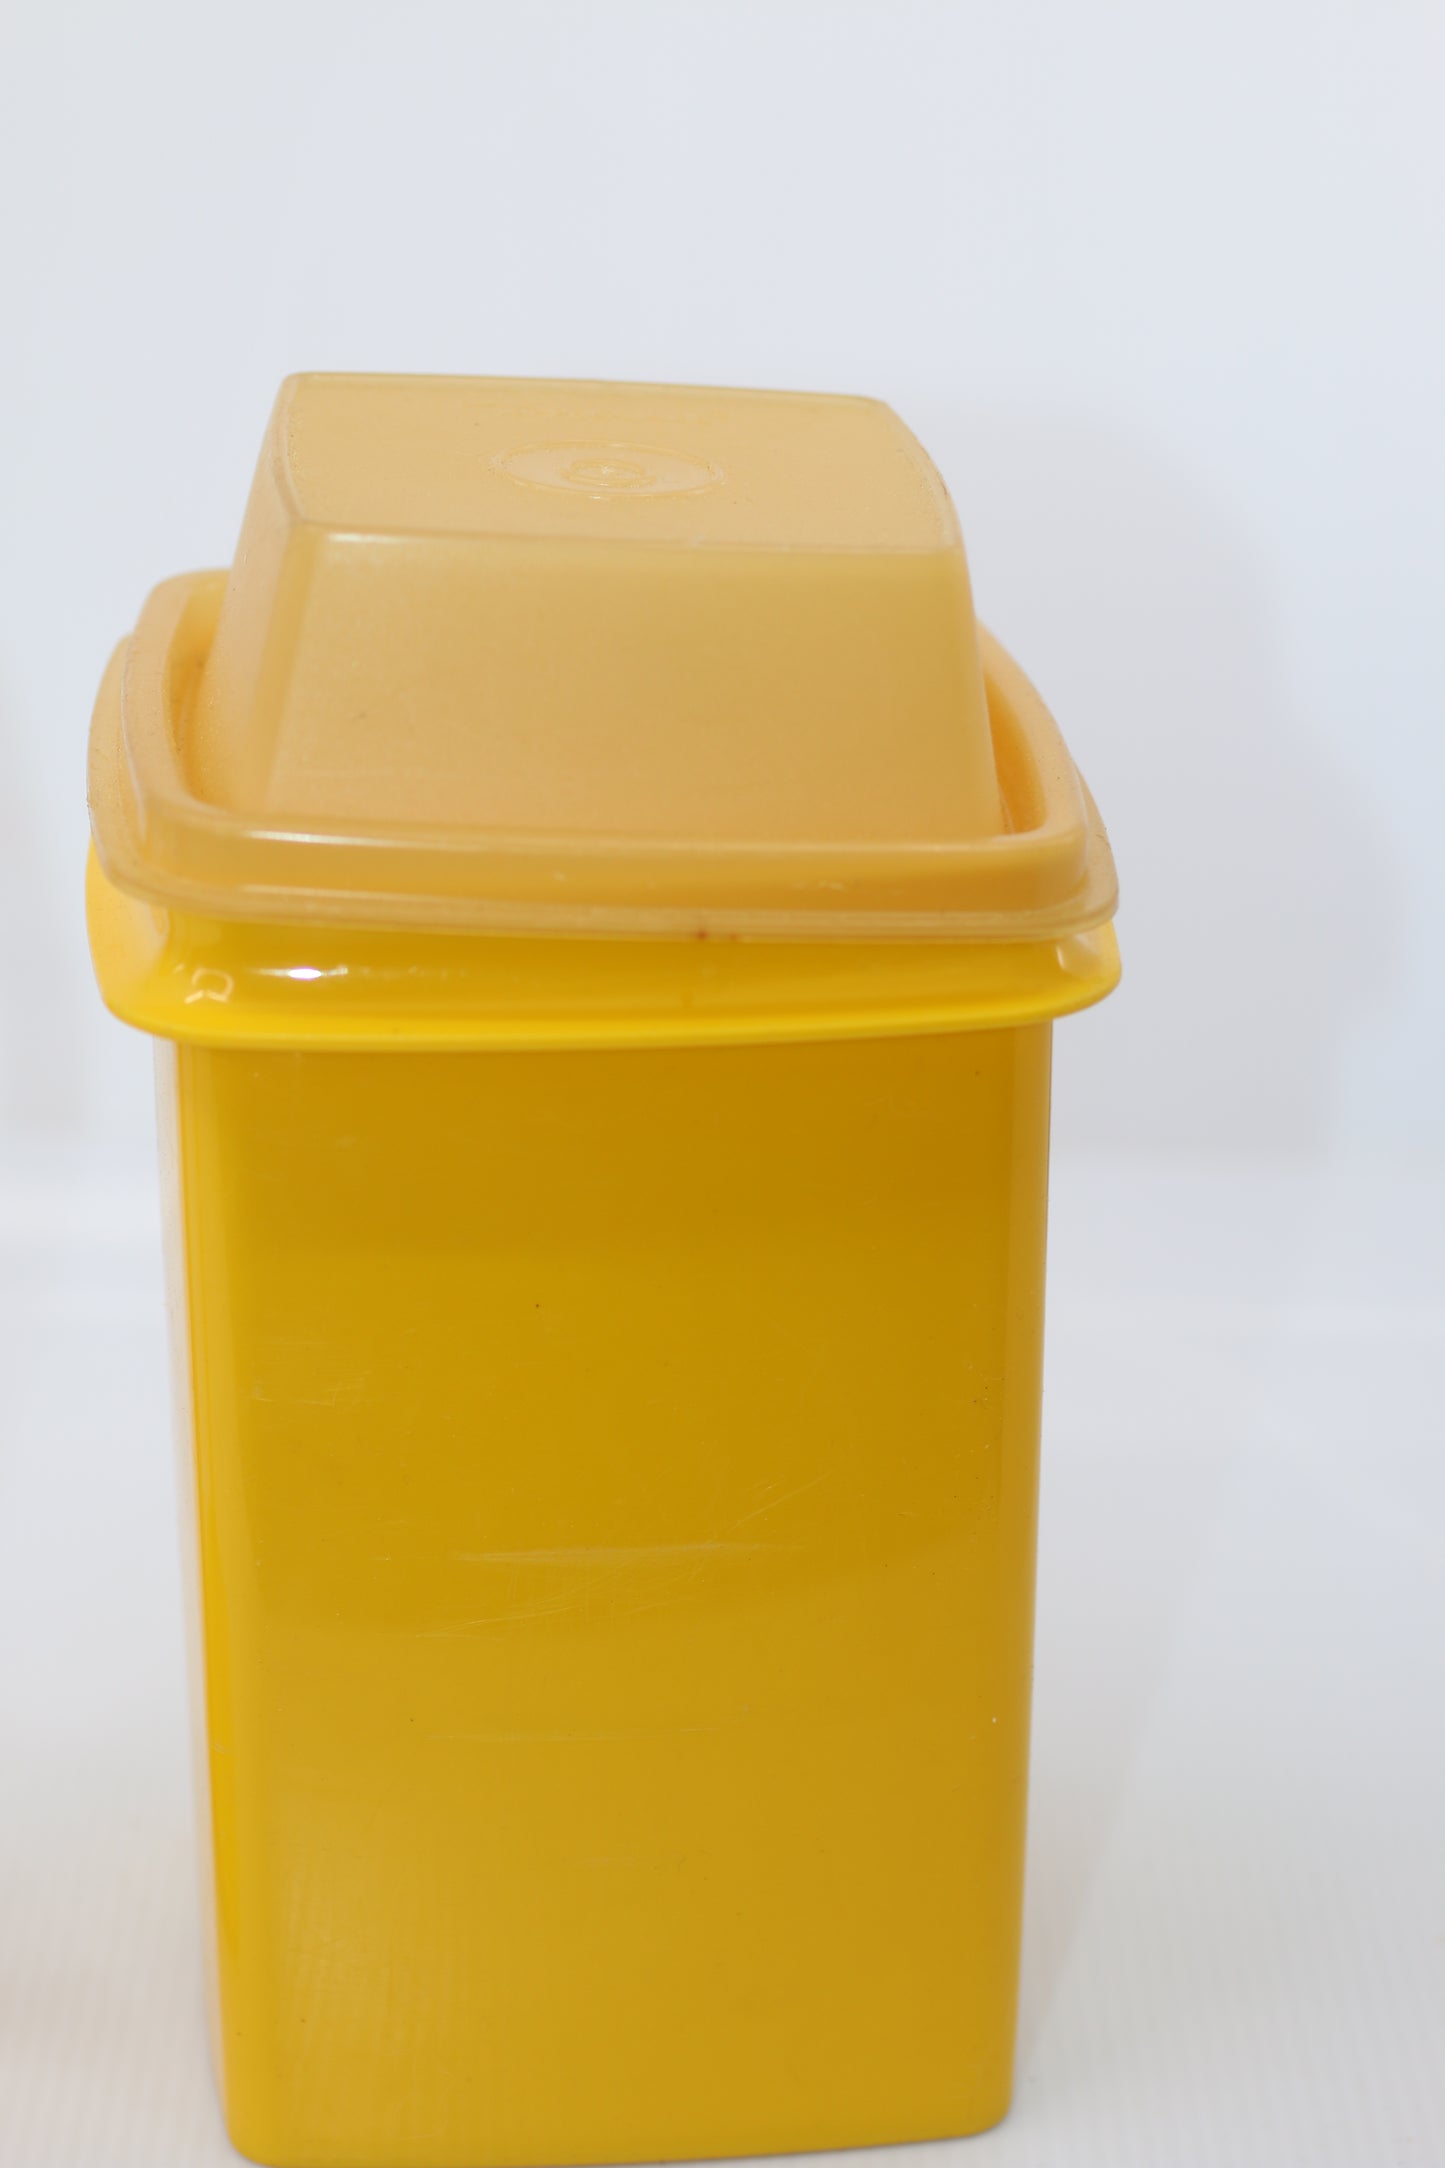 Tupperware Pickle Keeper Mustard Yellow With Lid And Matching Lifter, #1330-2